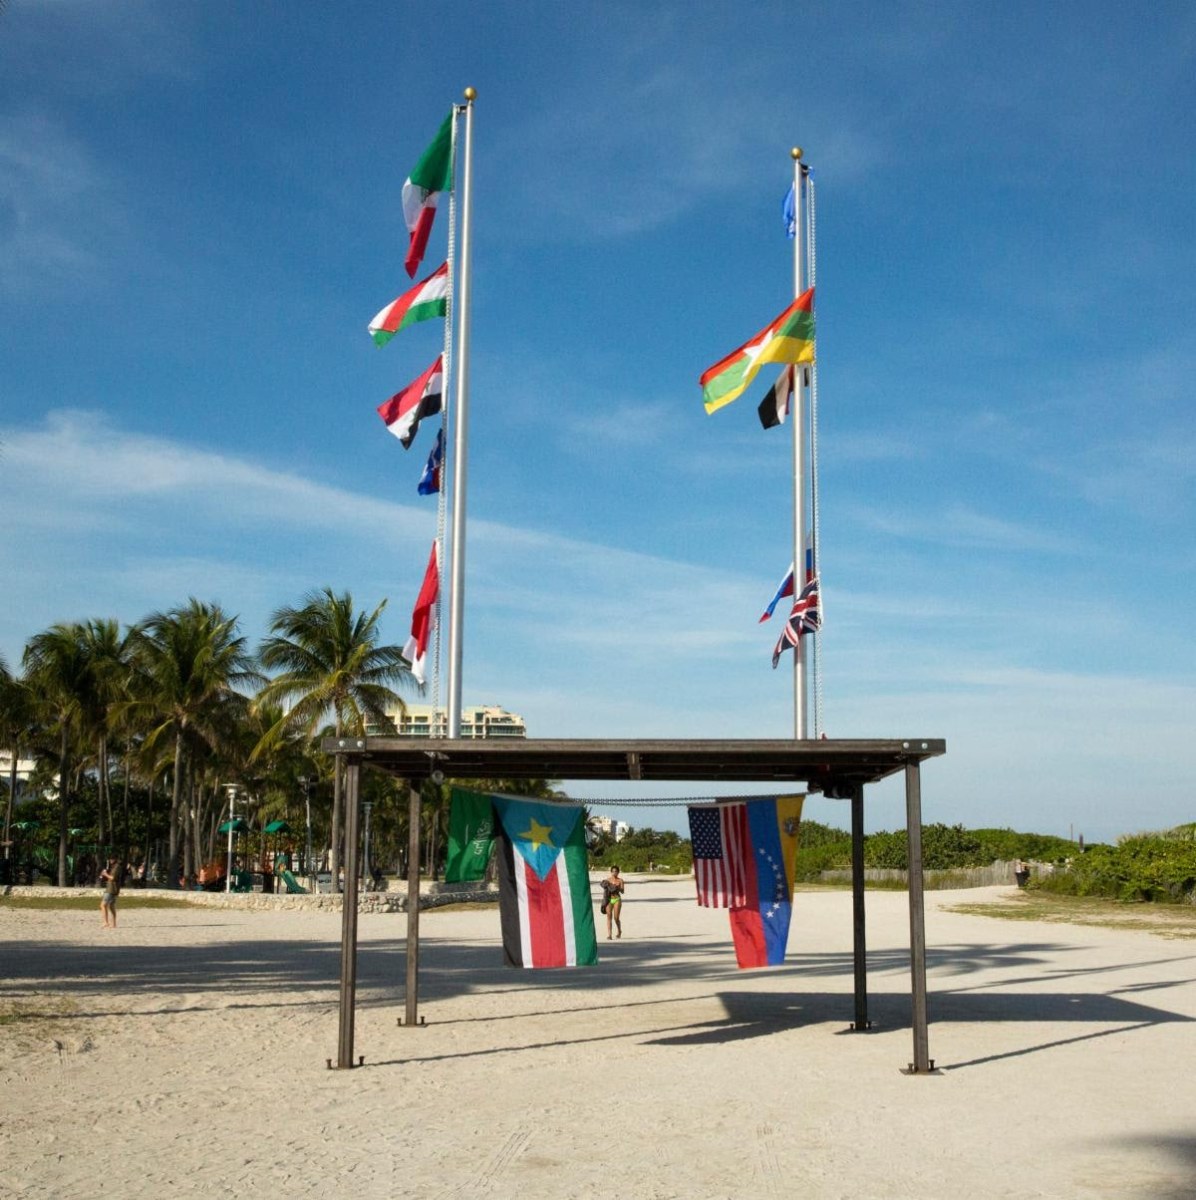 A large public sculpture on Miami Beach by Antonia Wright and Ruben Millares consisting of two flagpoles on a large steel platform. A motorized chain pulls flags from different countries up the poles and below the platform in a continuous motion.